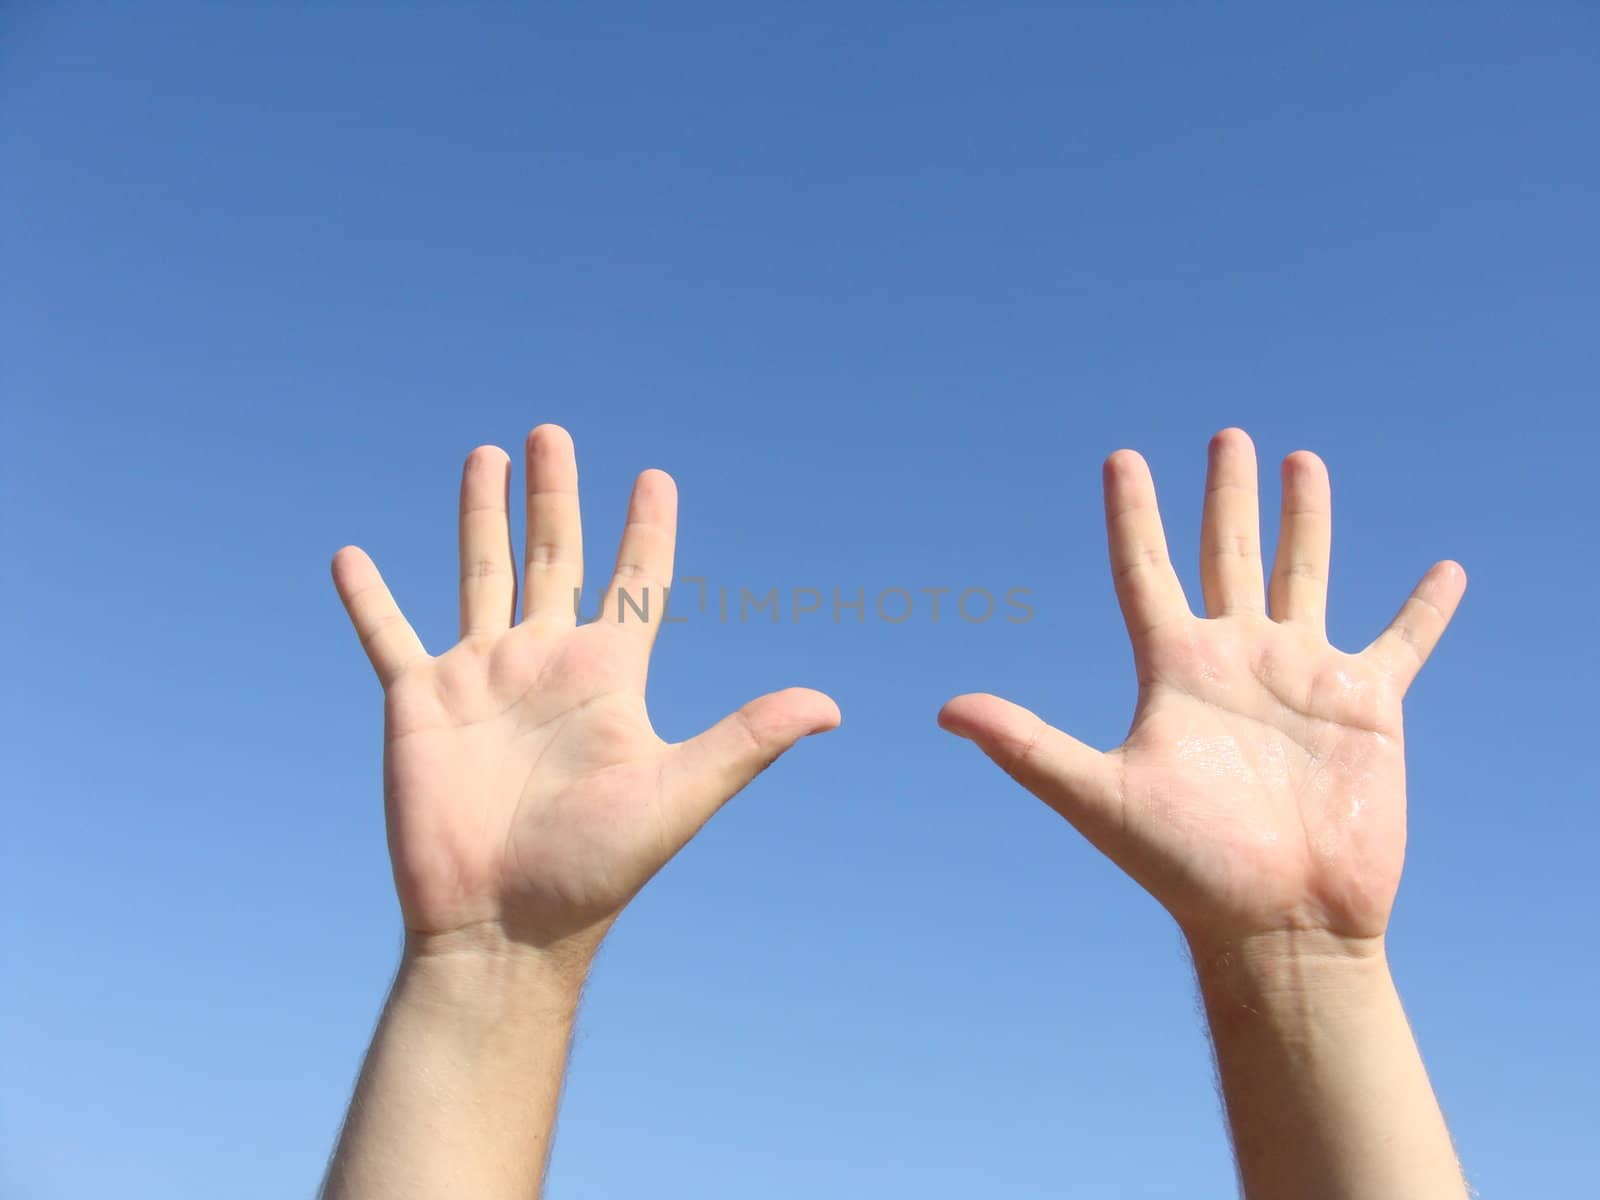 Two hands against the blue sky